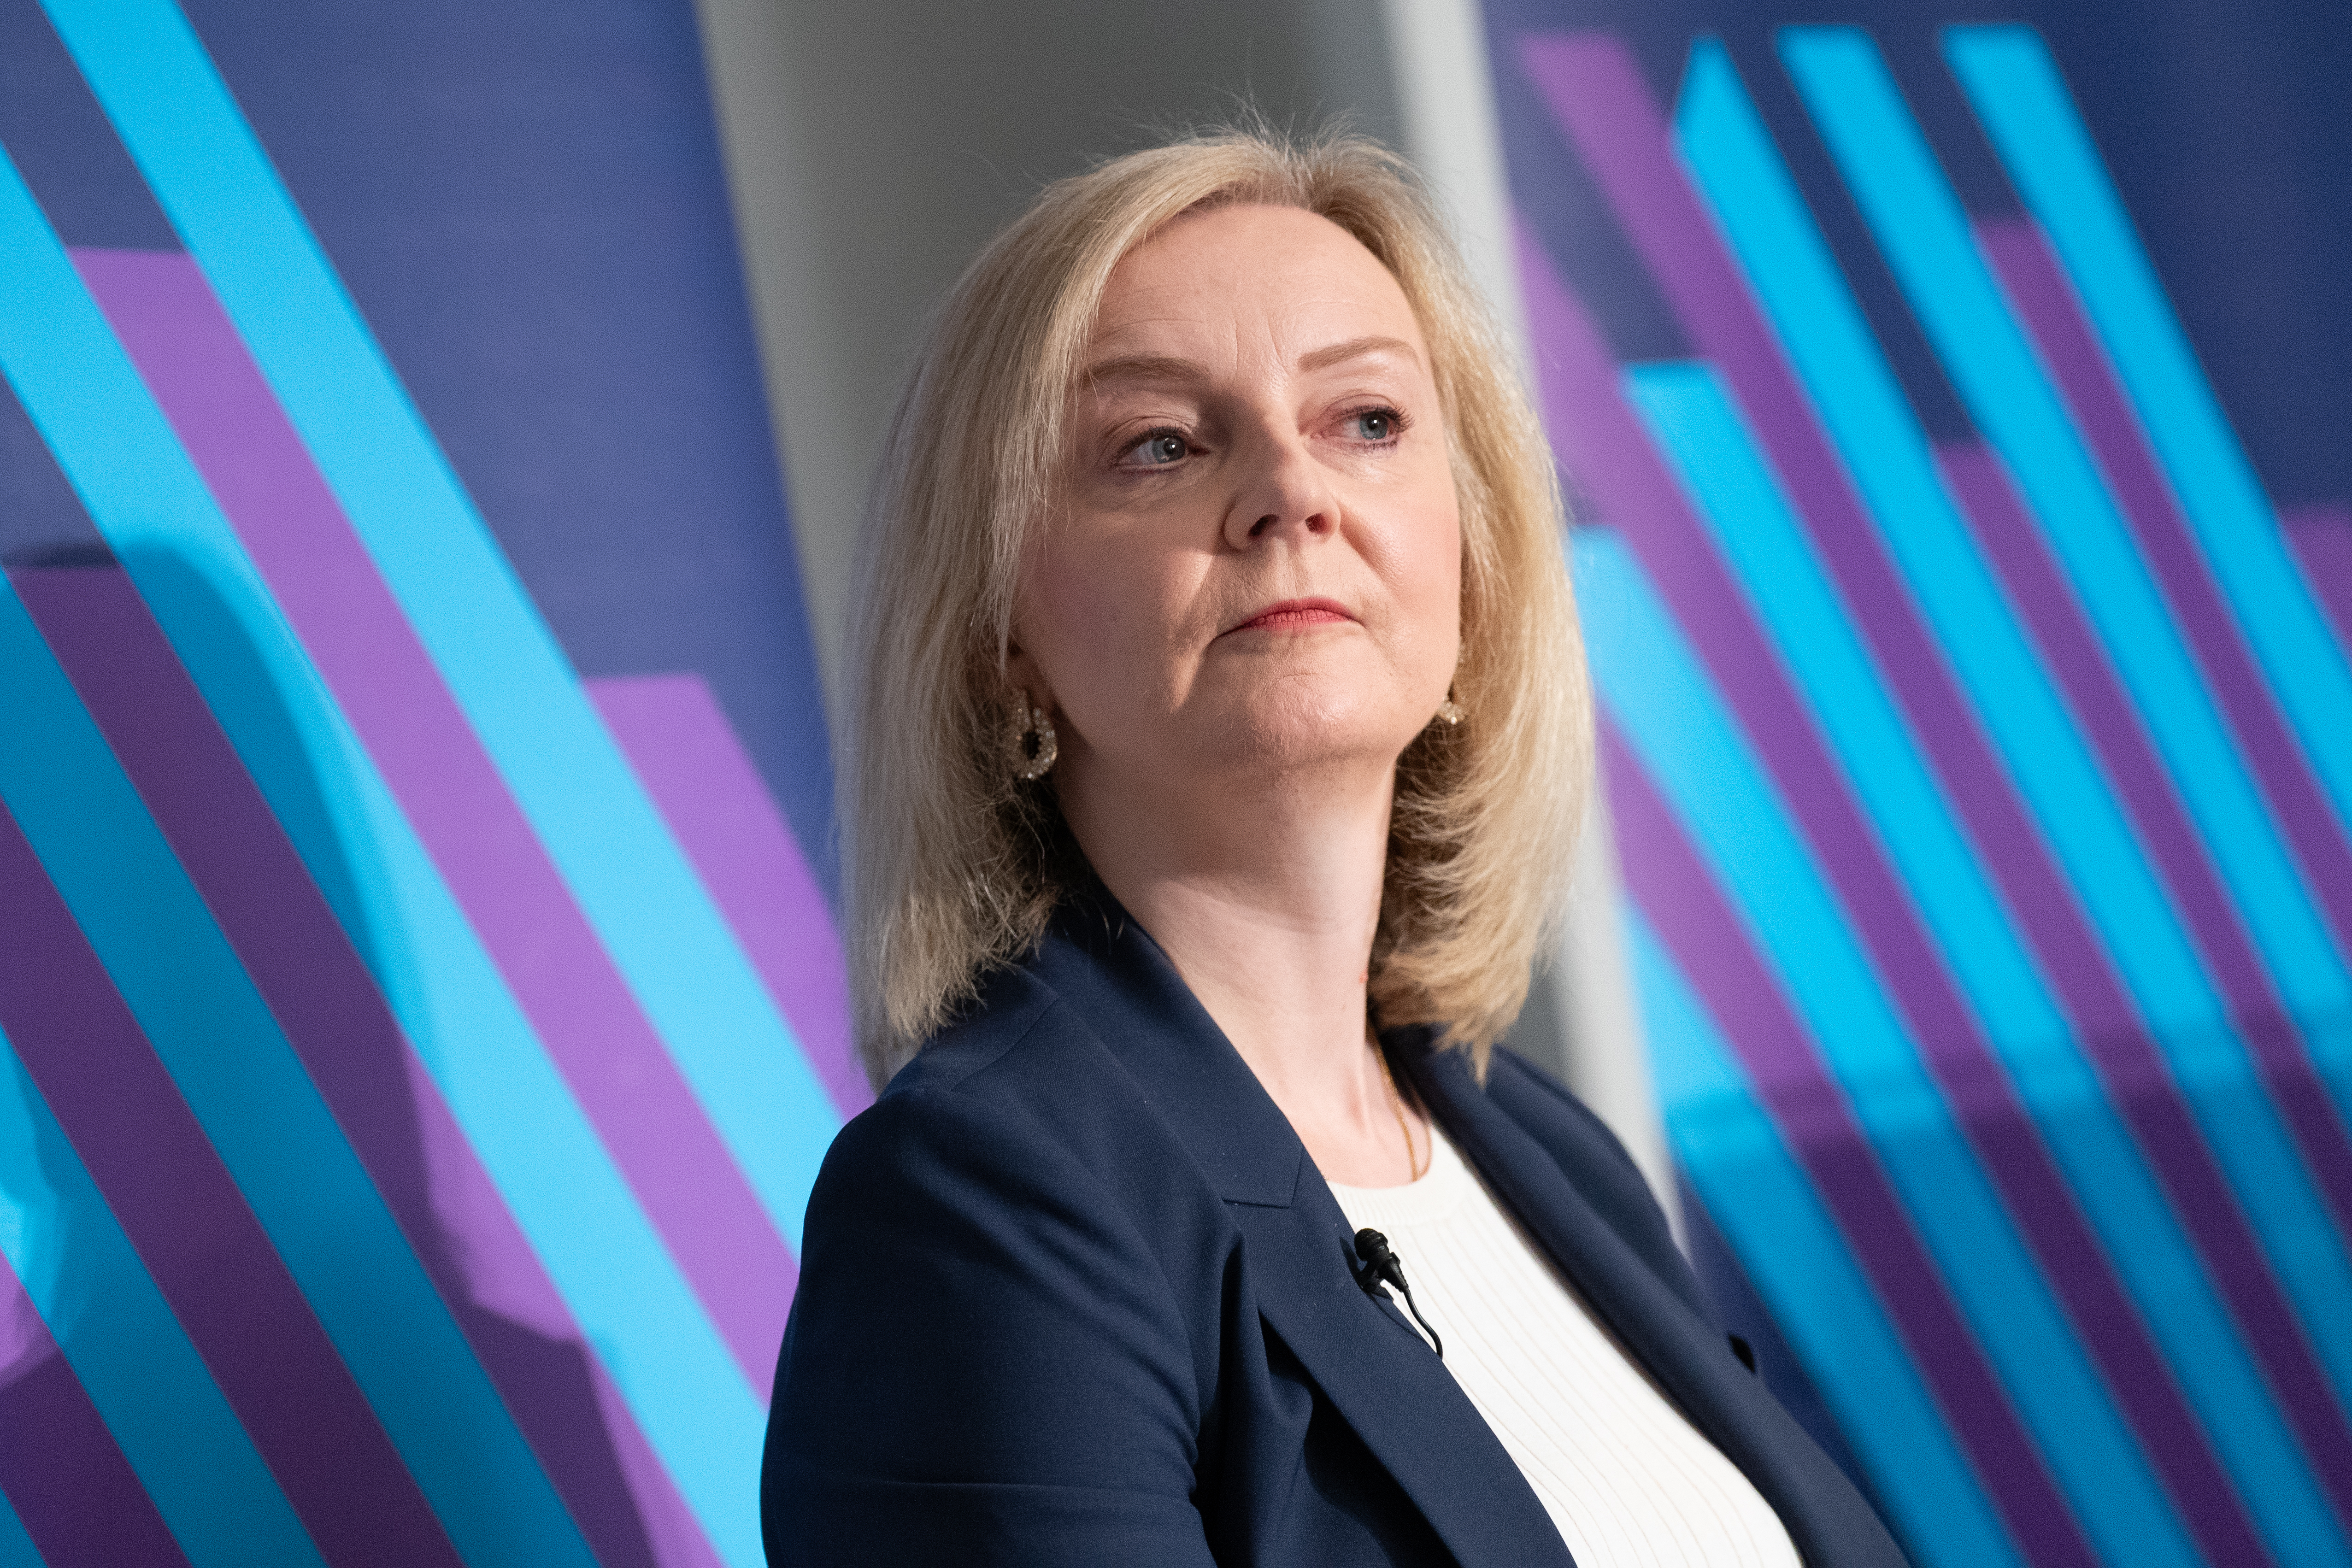 Liz Truss to propose law banning biological males from single-sex spaces